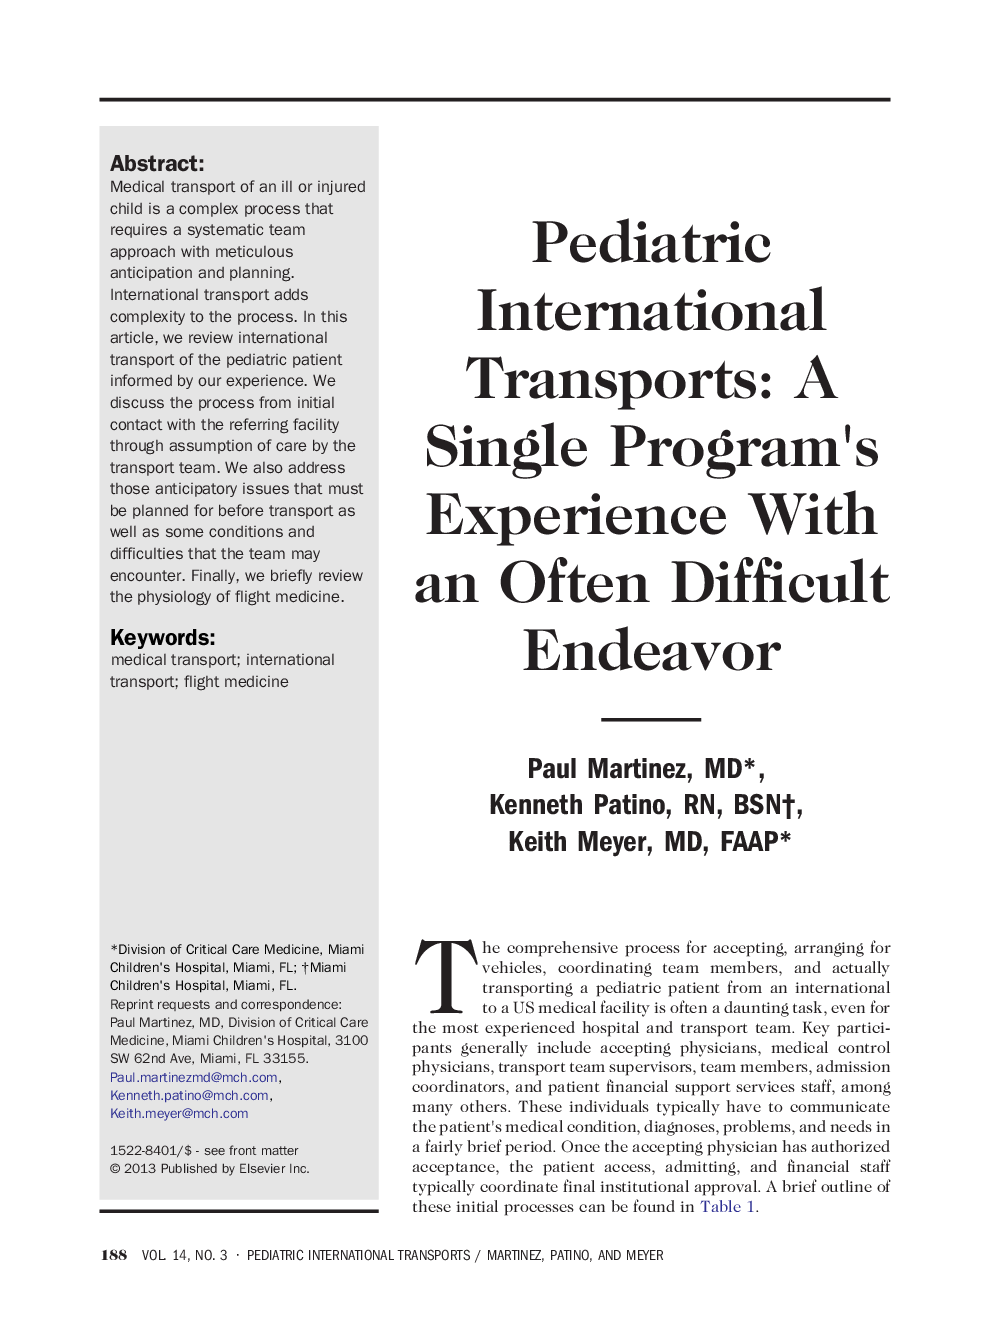 Pediatric International Transports: A Single Program's Experience With an Often Difficult Endeavor